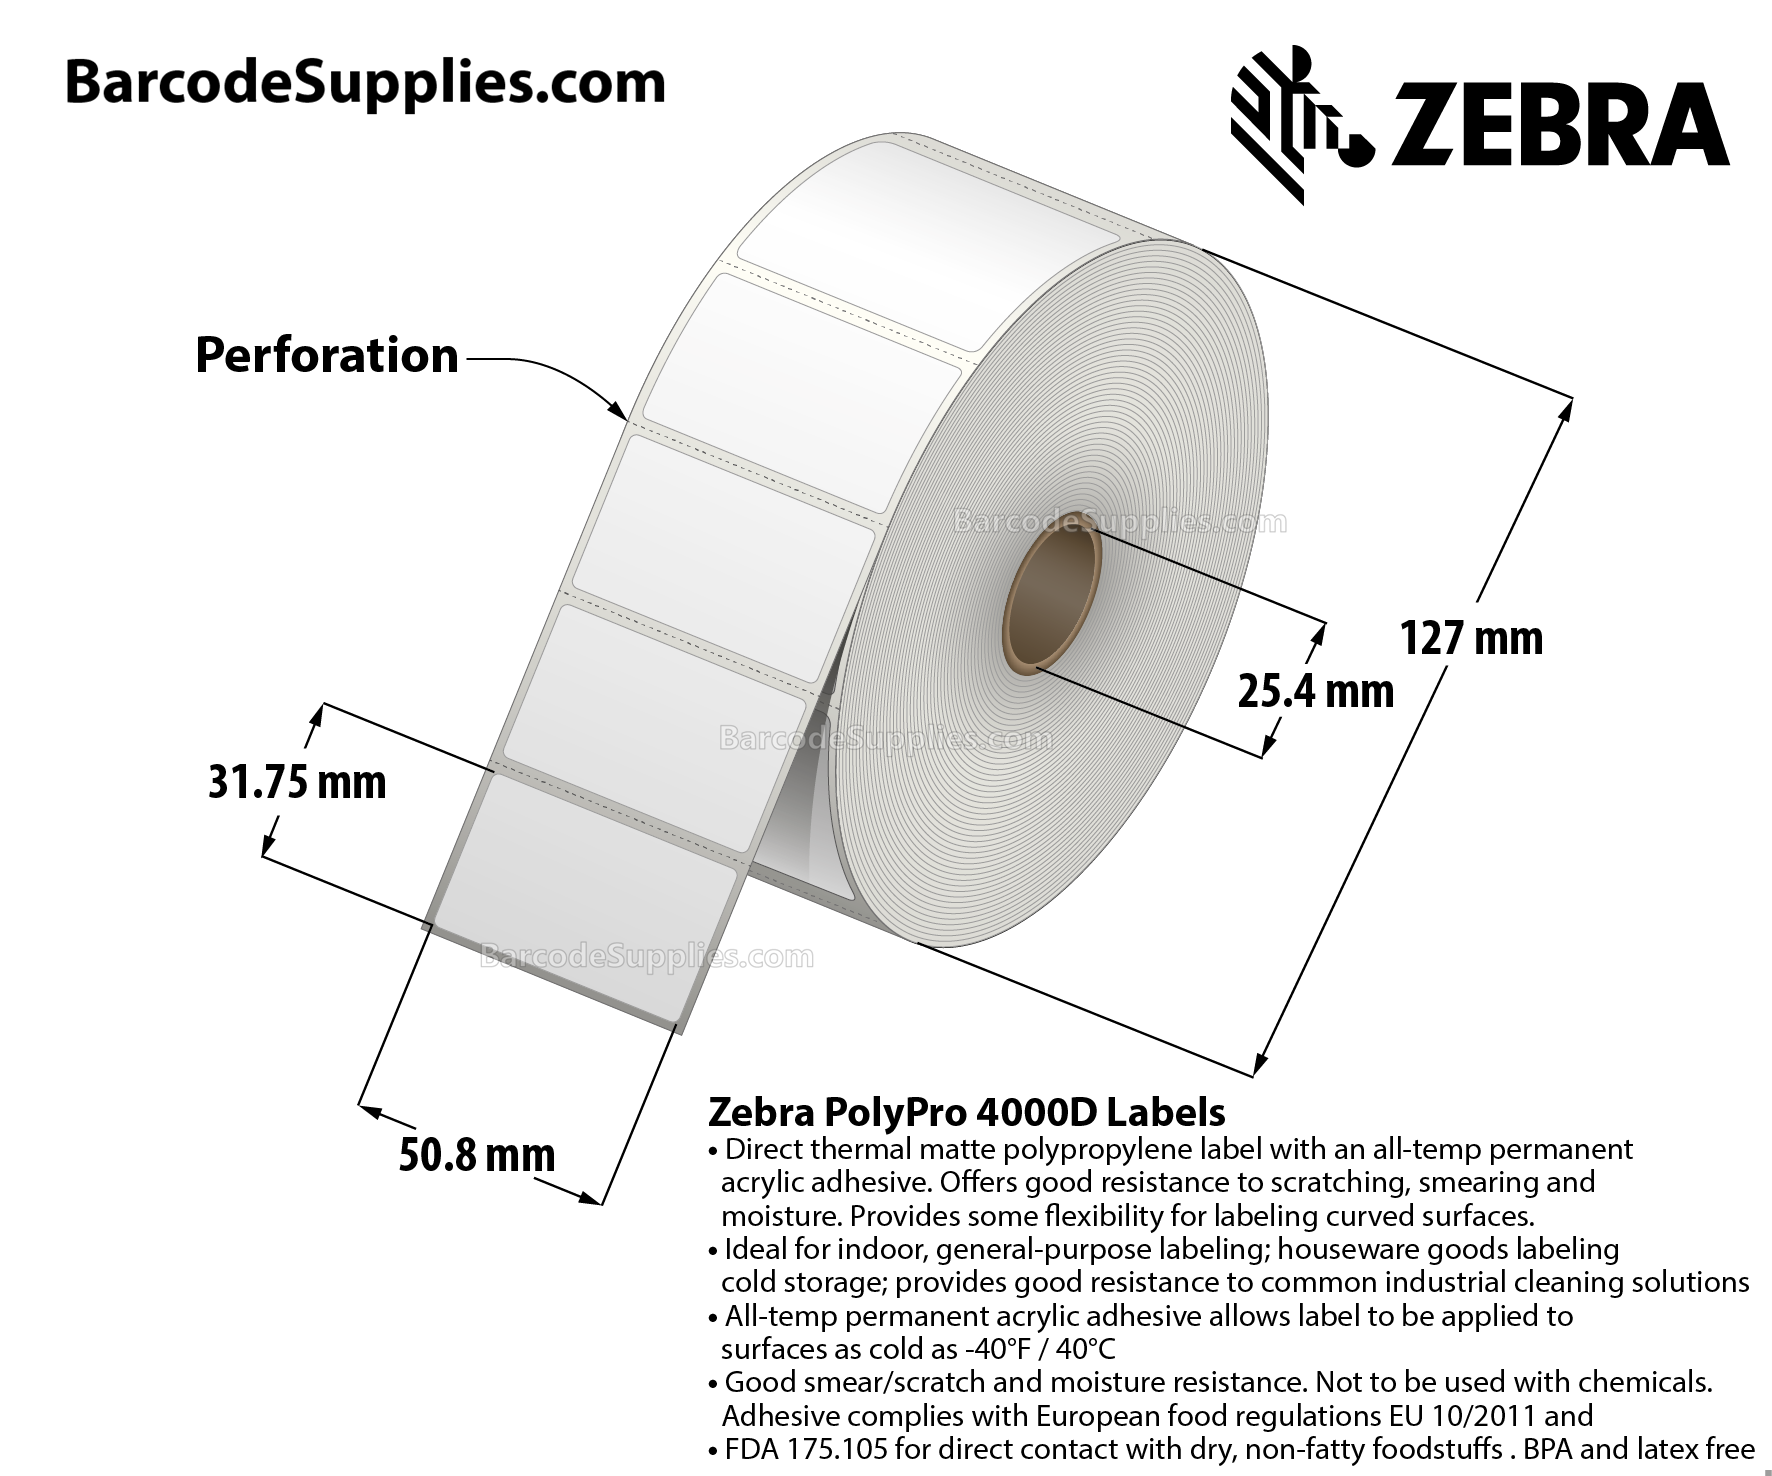 2 x 1.25 Direct Thermal White PolyPro 4000D (with protective overvarnish) Labels With All-Temp Adhesive - Perforated - 2189 Labels Per Roll - Carton Of 8 Rolls - 17512 Labels Total - MPN: 10028821